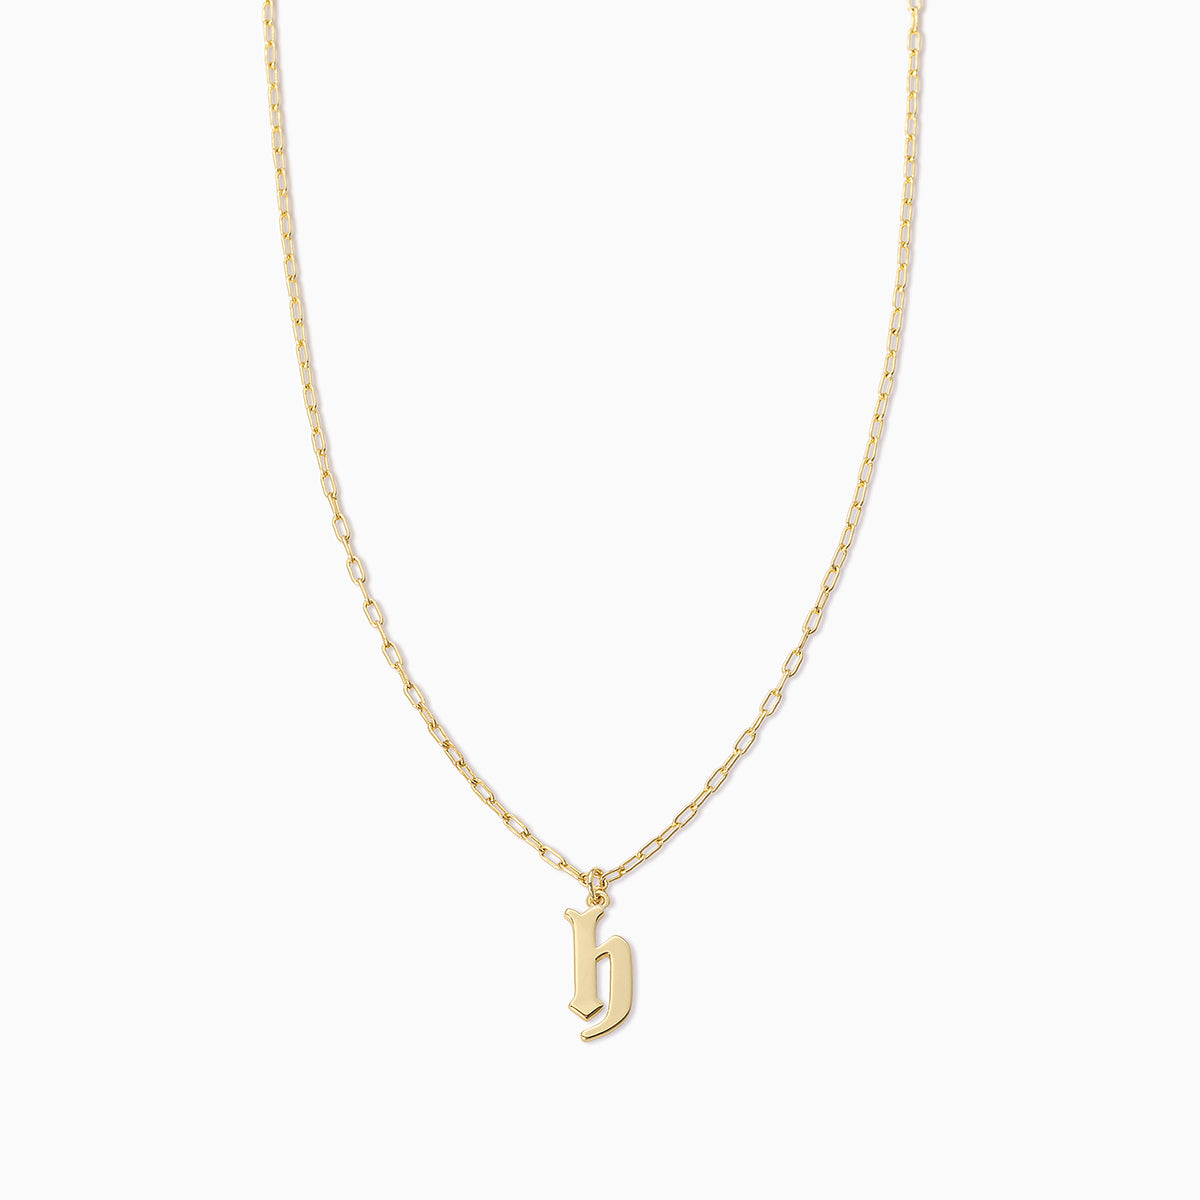 Gothic Initial Pendant Necklace | Gold H | Product Image | Uncommon James